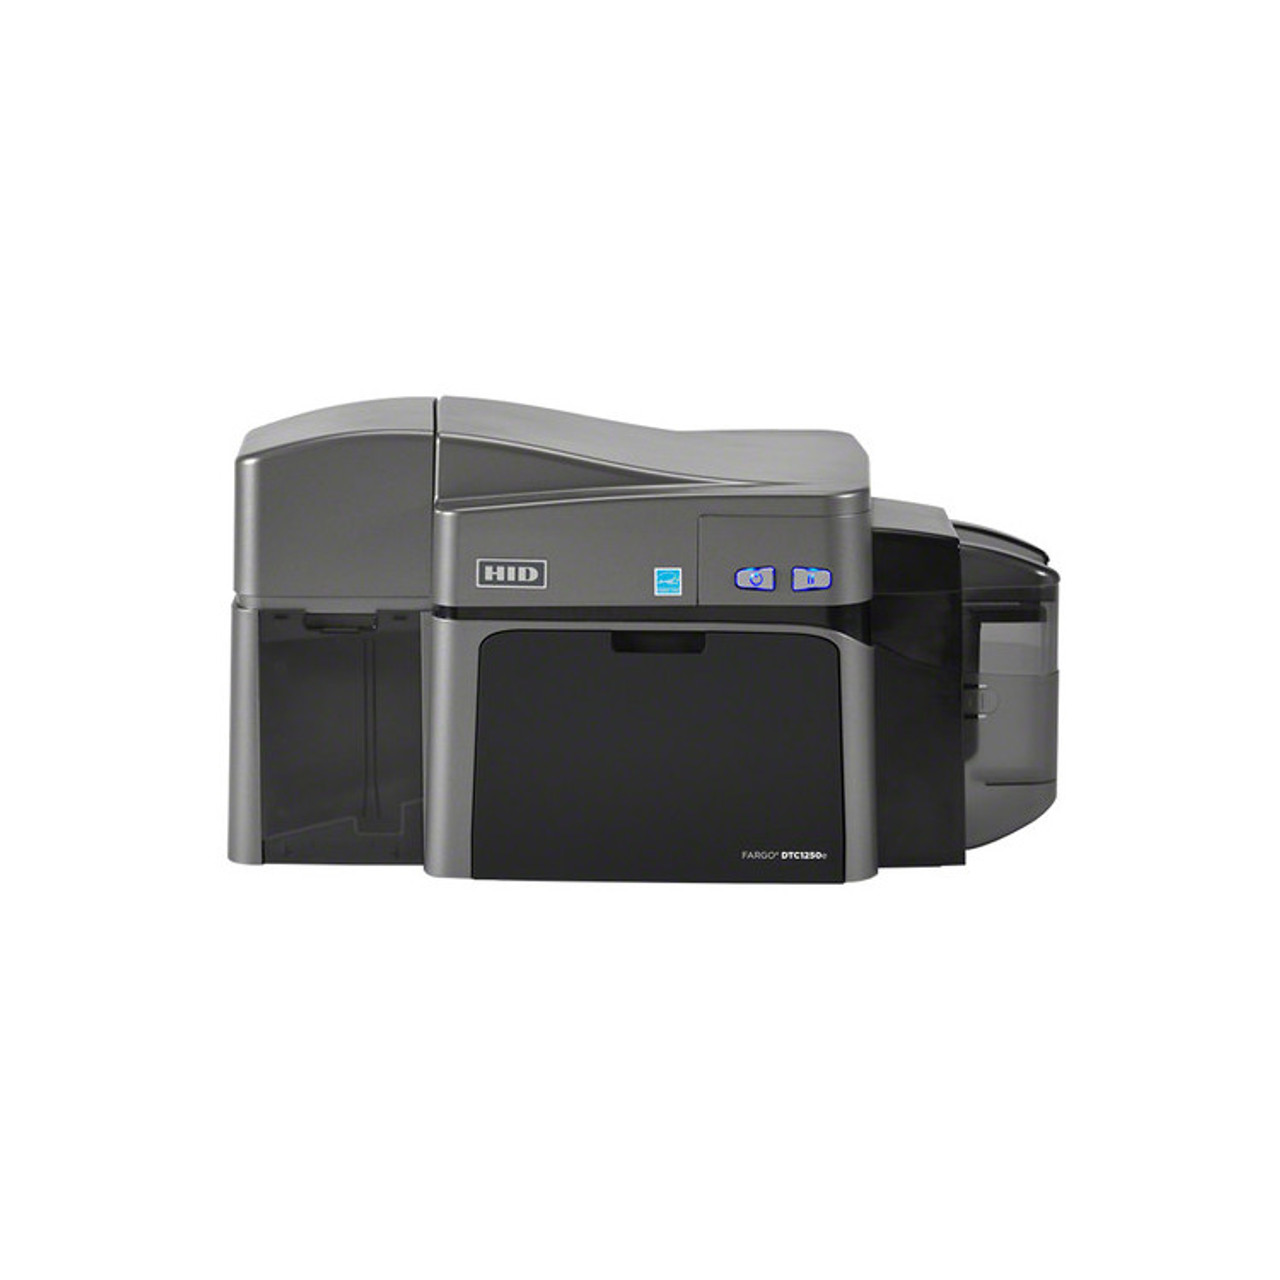 Dual-Sided Card Printer with Ethernet